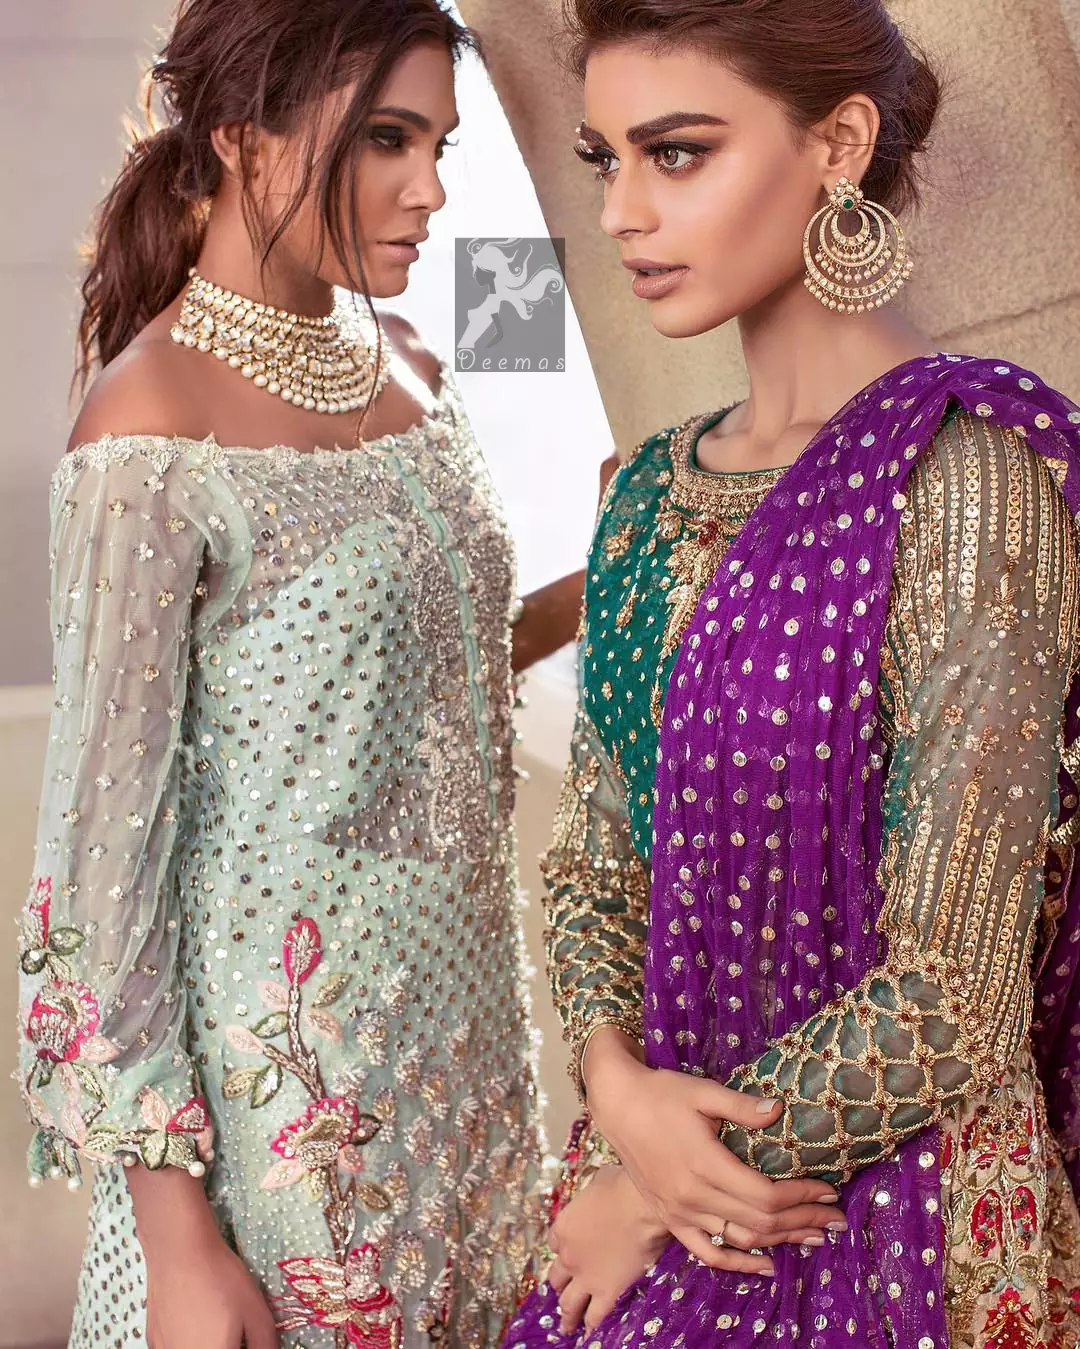 Sweetheart neckline pure crinkle chiffon shirt adorned with embellishment. Embellishment includes majorly light golden, silver, shocking pink and mehndi green shades. Shirt comes with embroidered sharara and net dupatta.